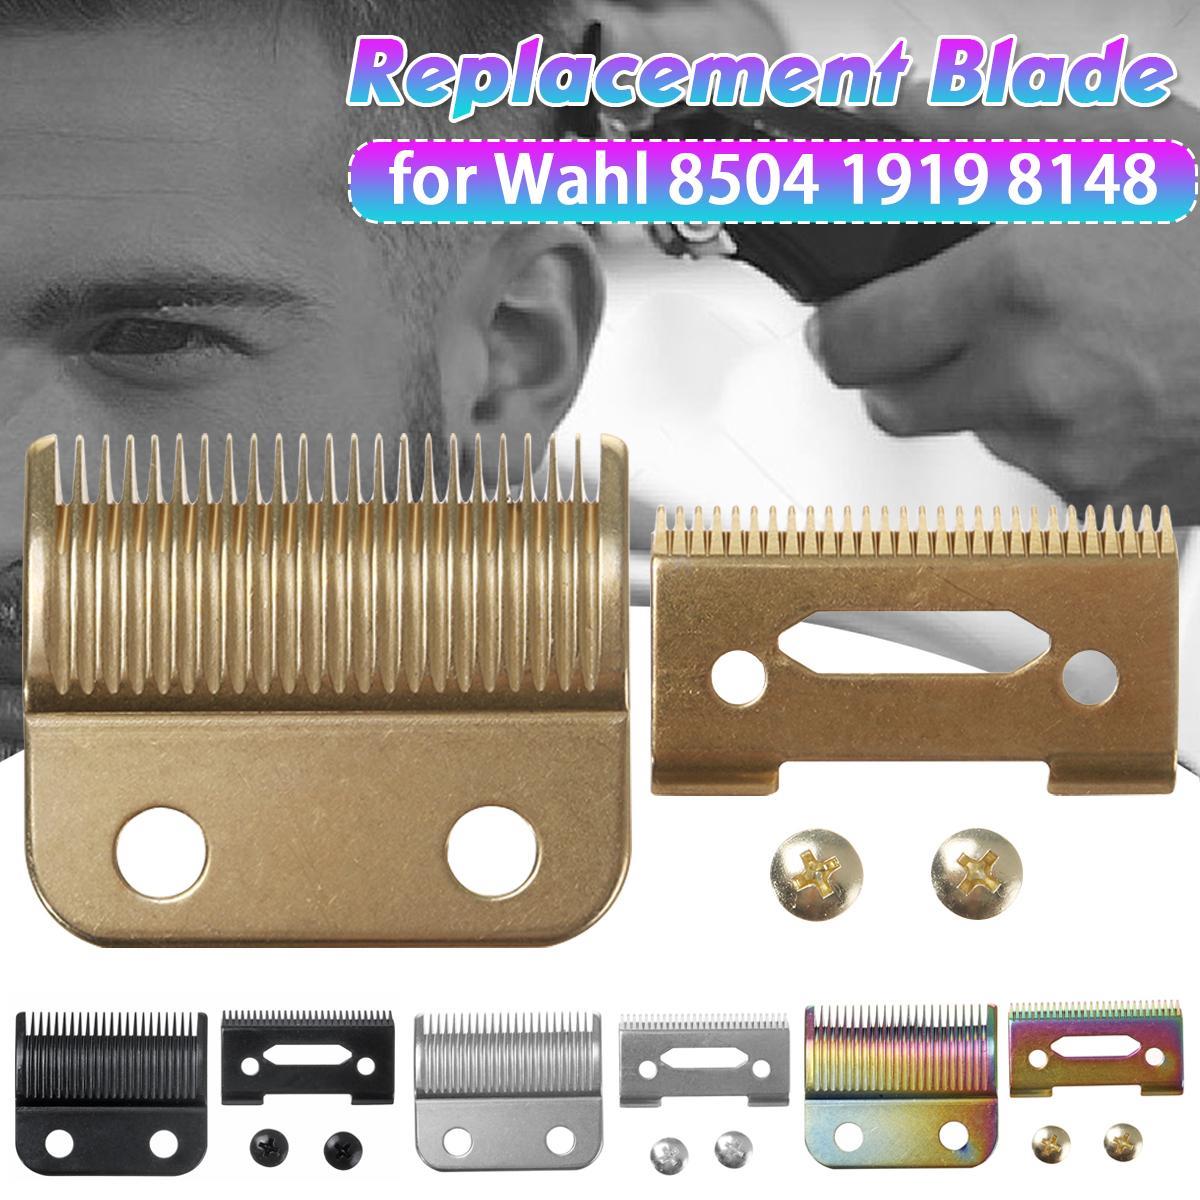 2 in 1 Hair Cutter Head Metal Bottom Clipper Replace Blade For Wahl Electric Shear